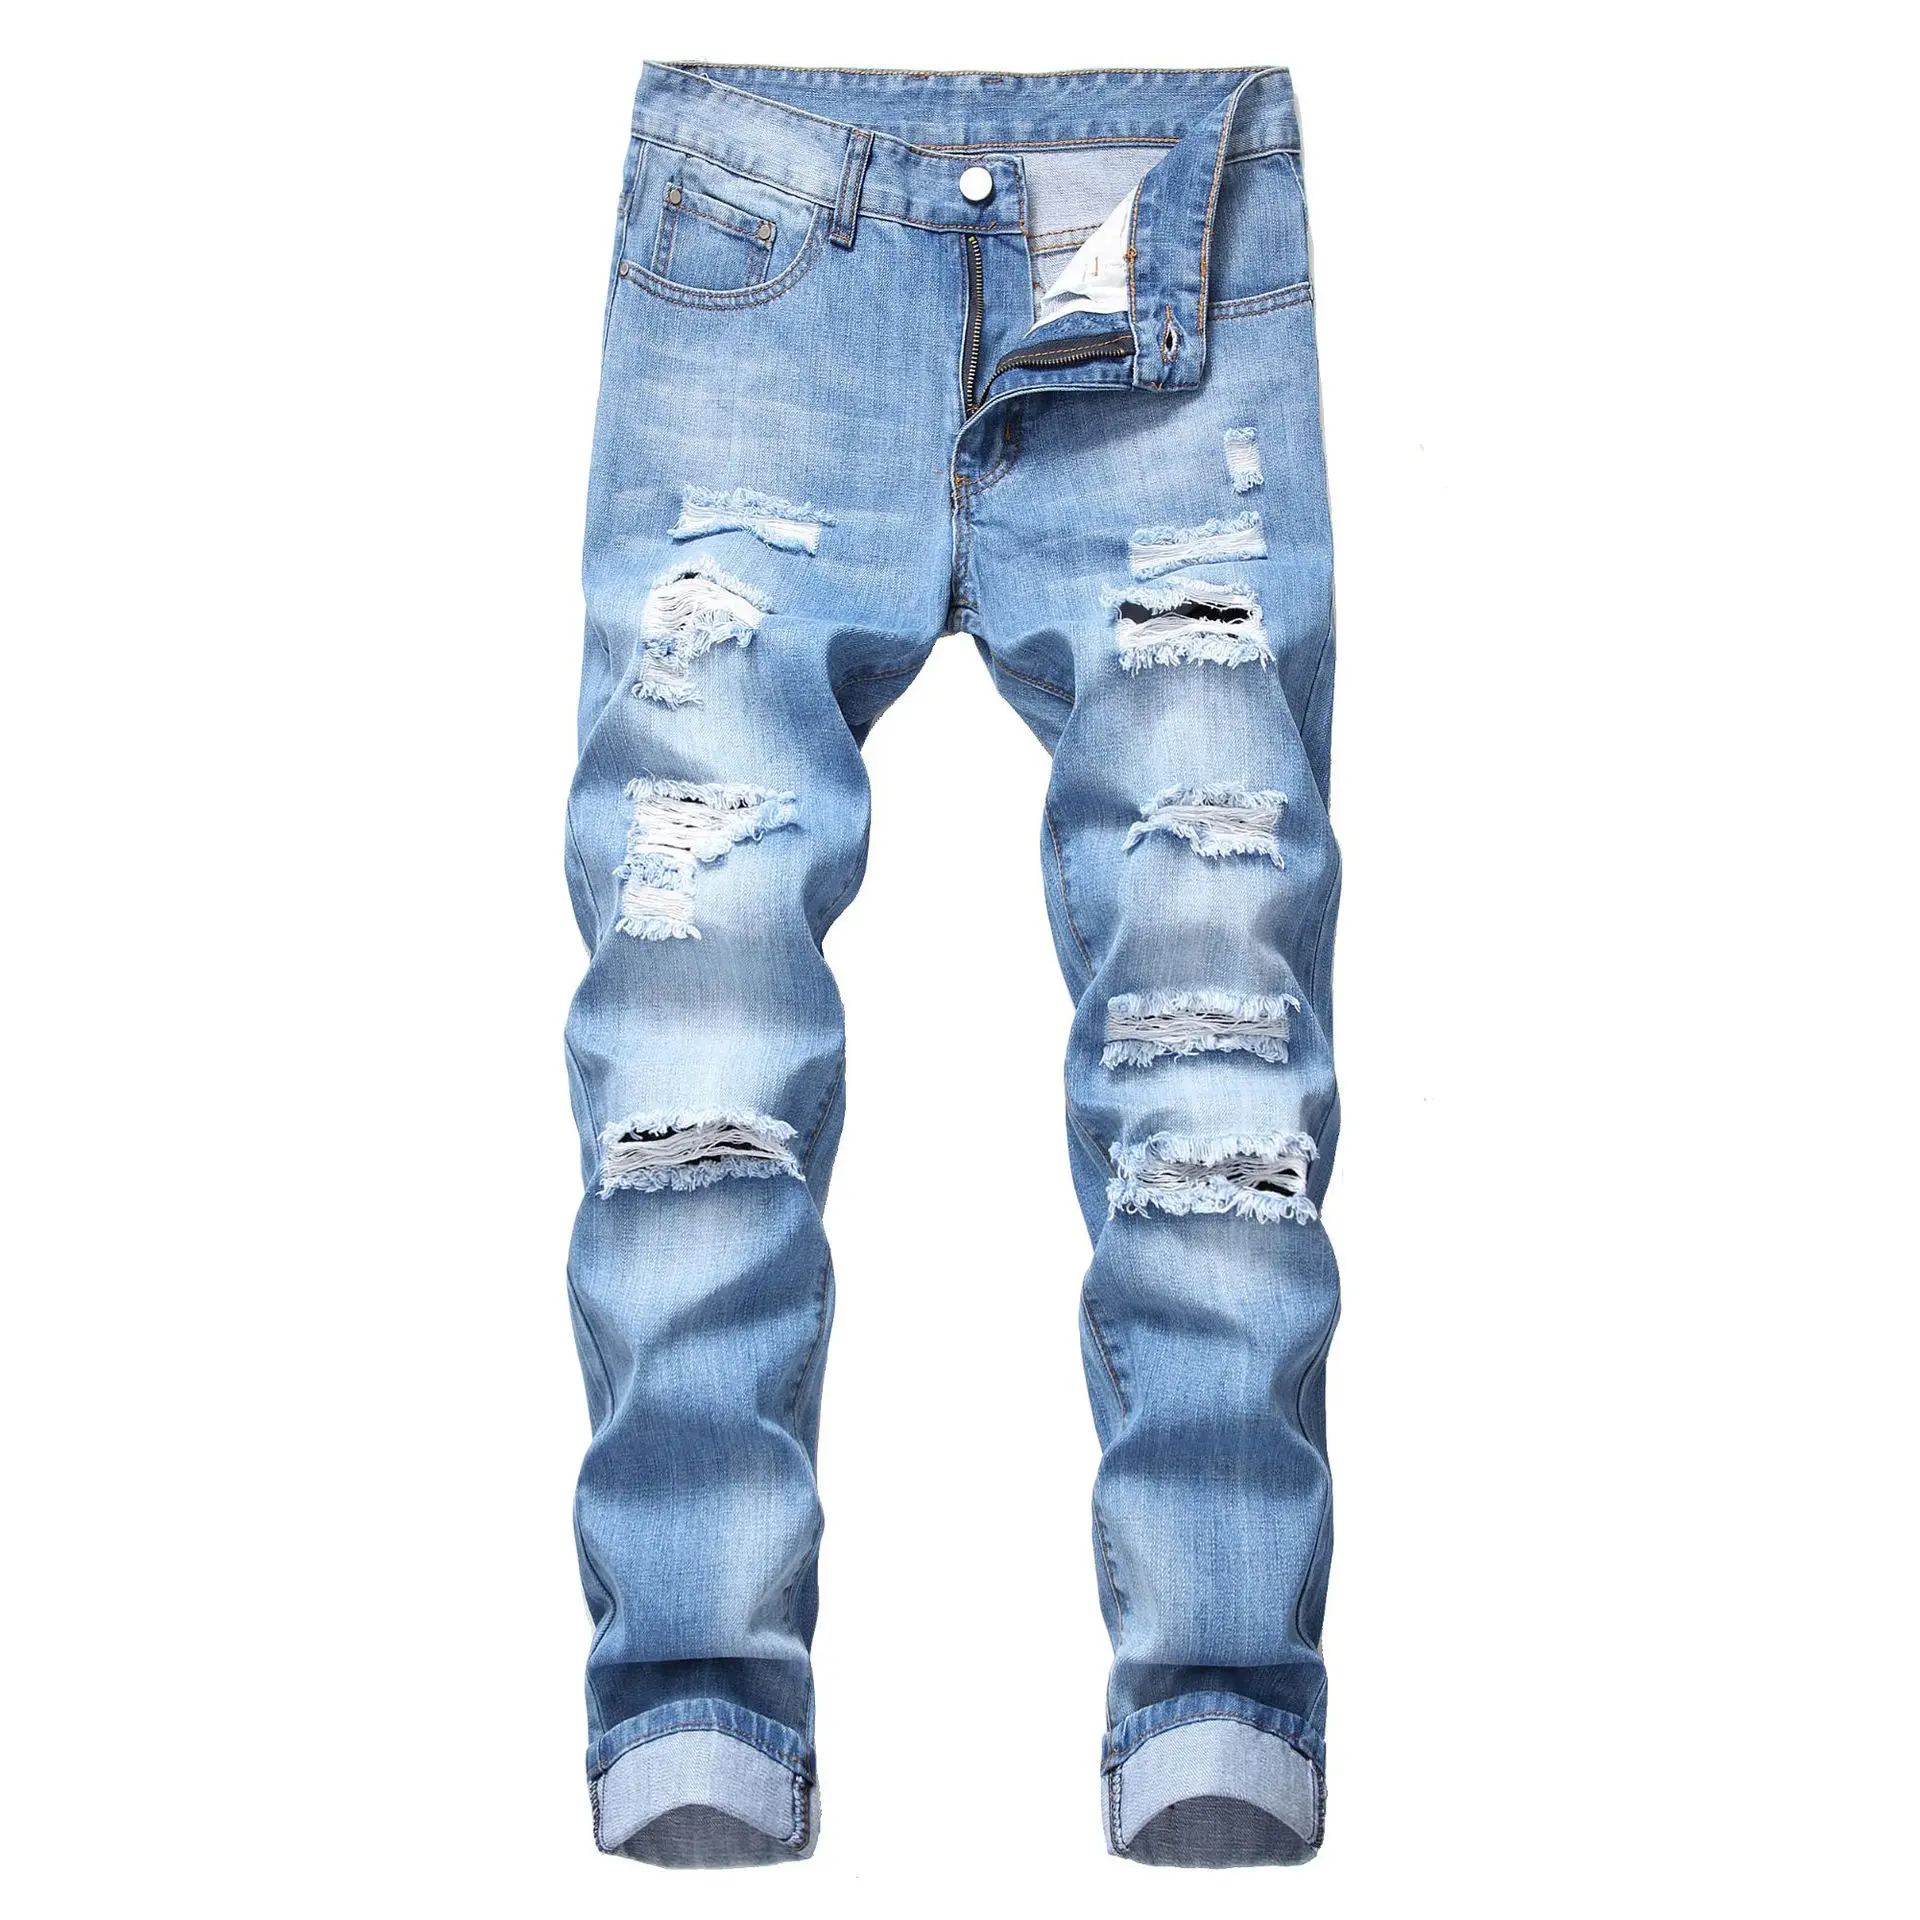 2022 New European American Mens Casual Ripped Jeans Denim Pants Male Worn Out High Quality Retro Biker Straight Trousers